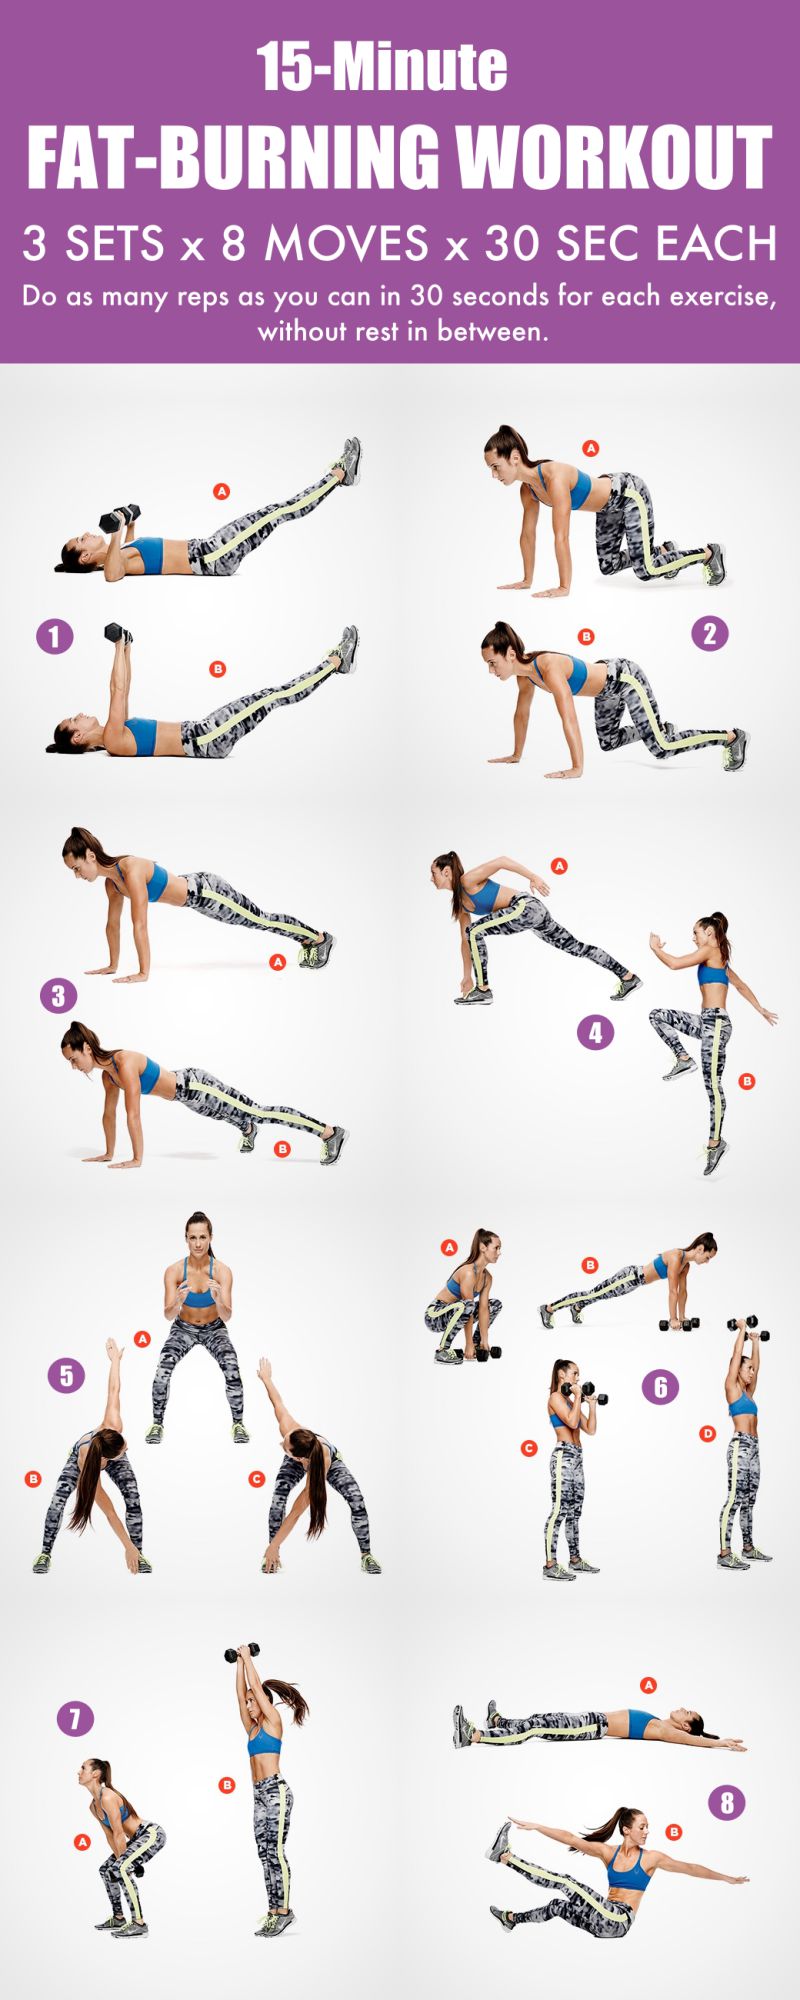 15-Minute Total Fat-Burning Workout Routine - Fitneass